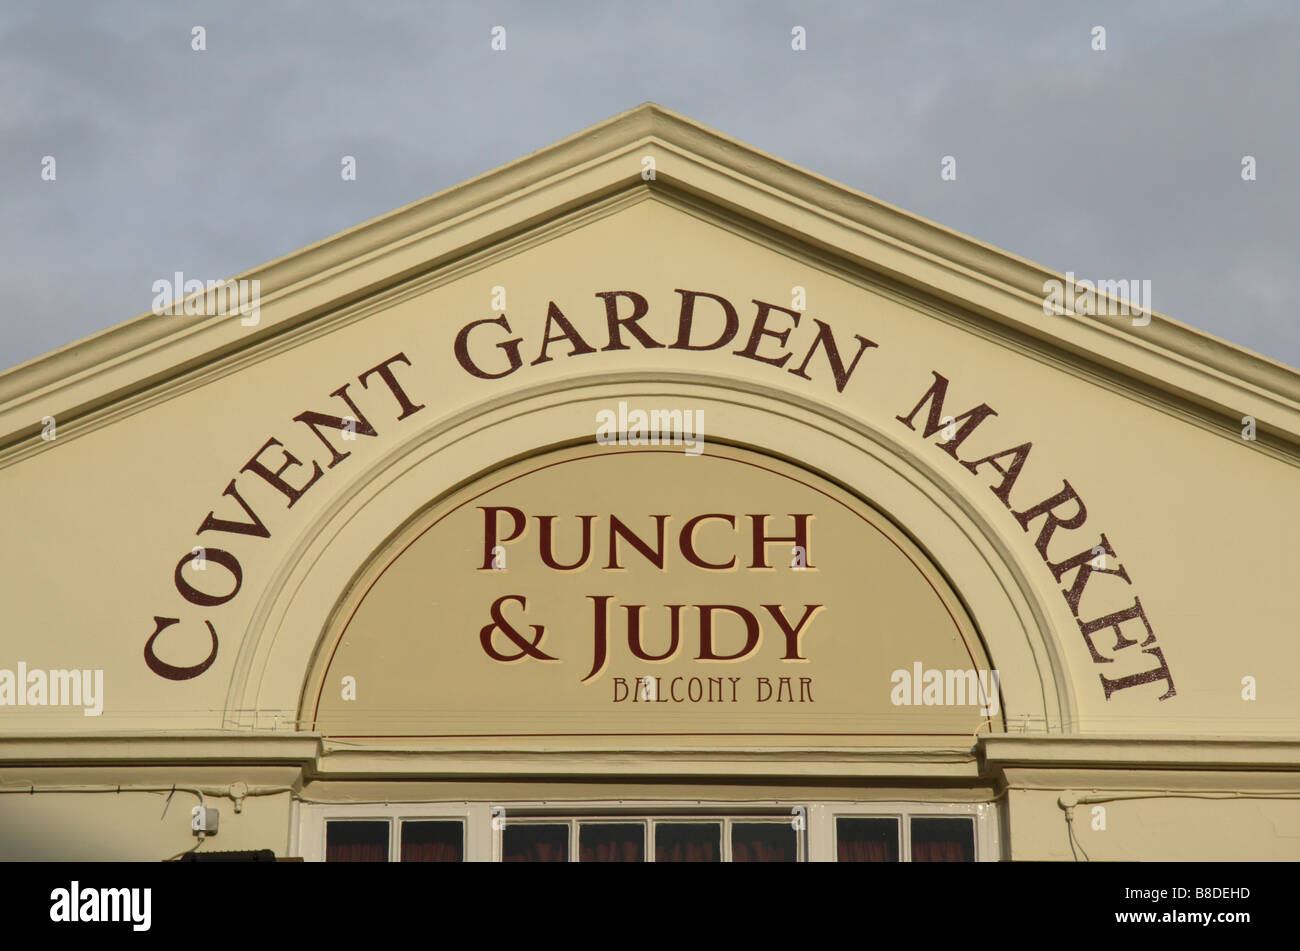 A sign above the Covent Garden Market building, Covent Garden, London. Jan 2009 Stock Photo